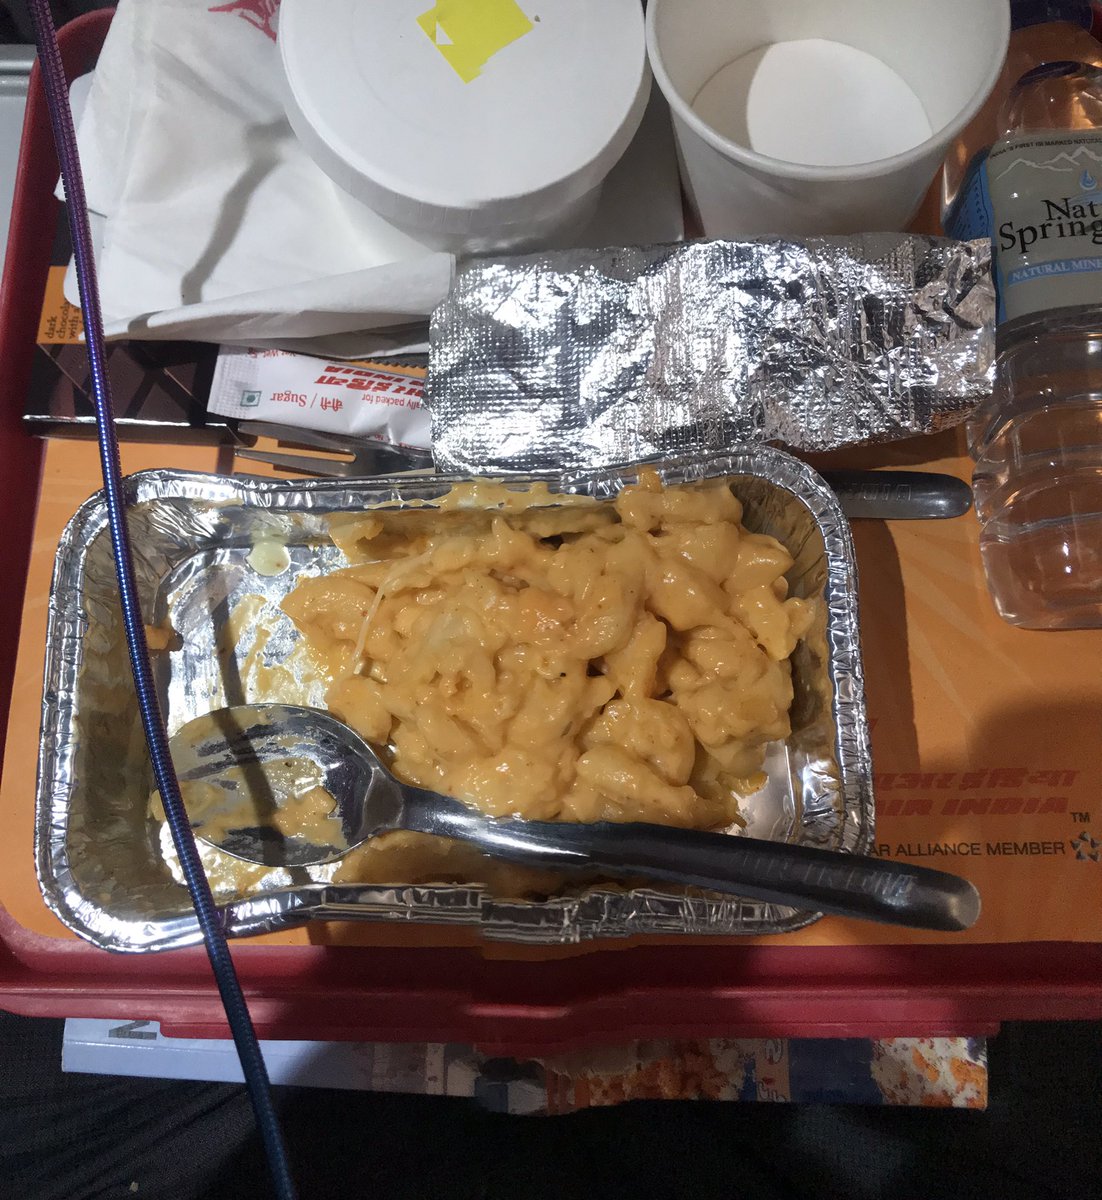 @airindia @tataairlines @tataairways today in AI849 Del-pune cheese laden pasta was served.definitely not d best of food 🥘 to be served from a health point.Would like to see sprouted veg salad in d food choice.over that there is no salt or pepper given for seasoning garnishing🤔